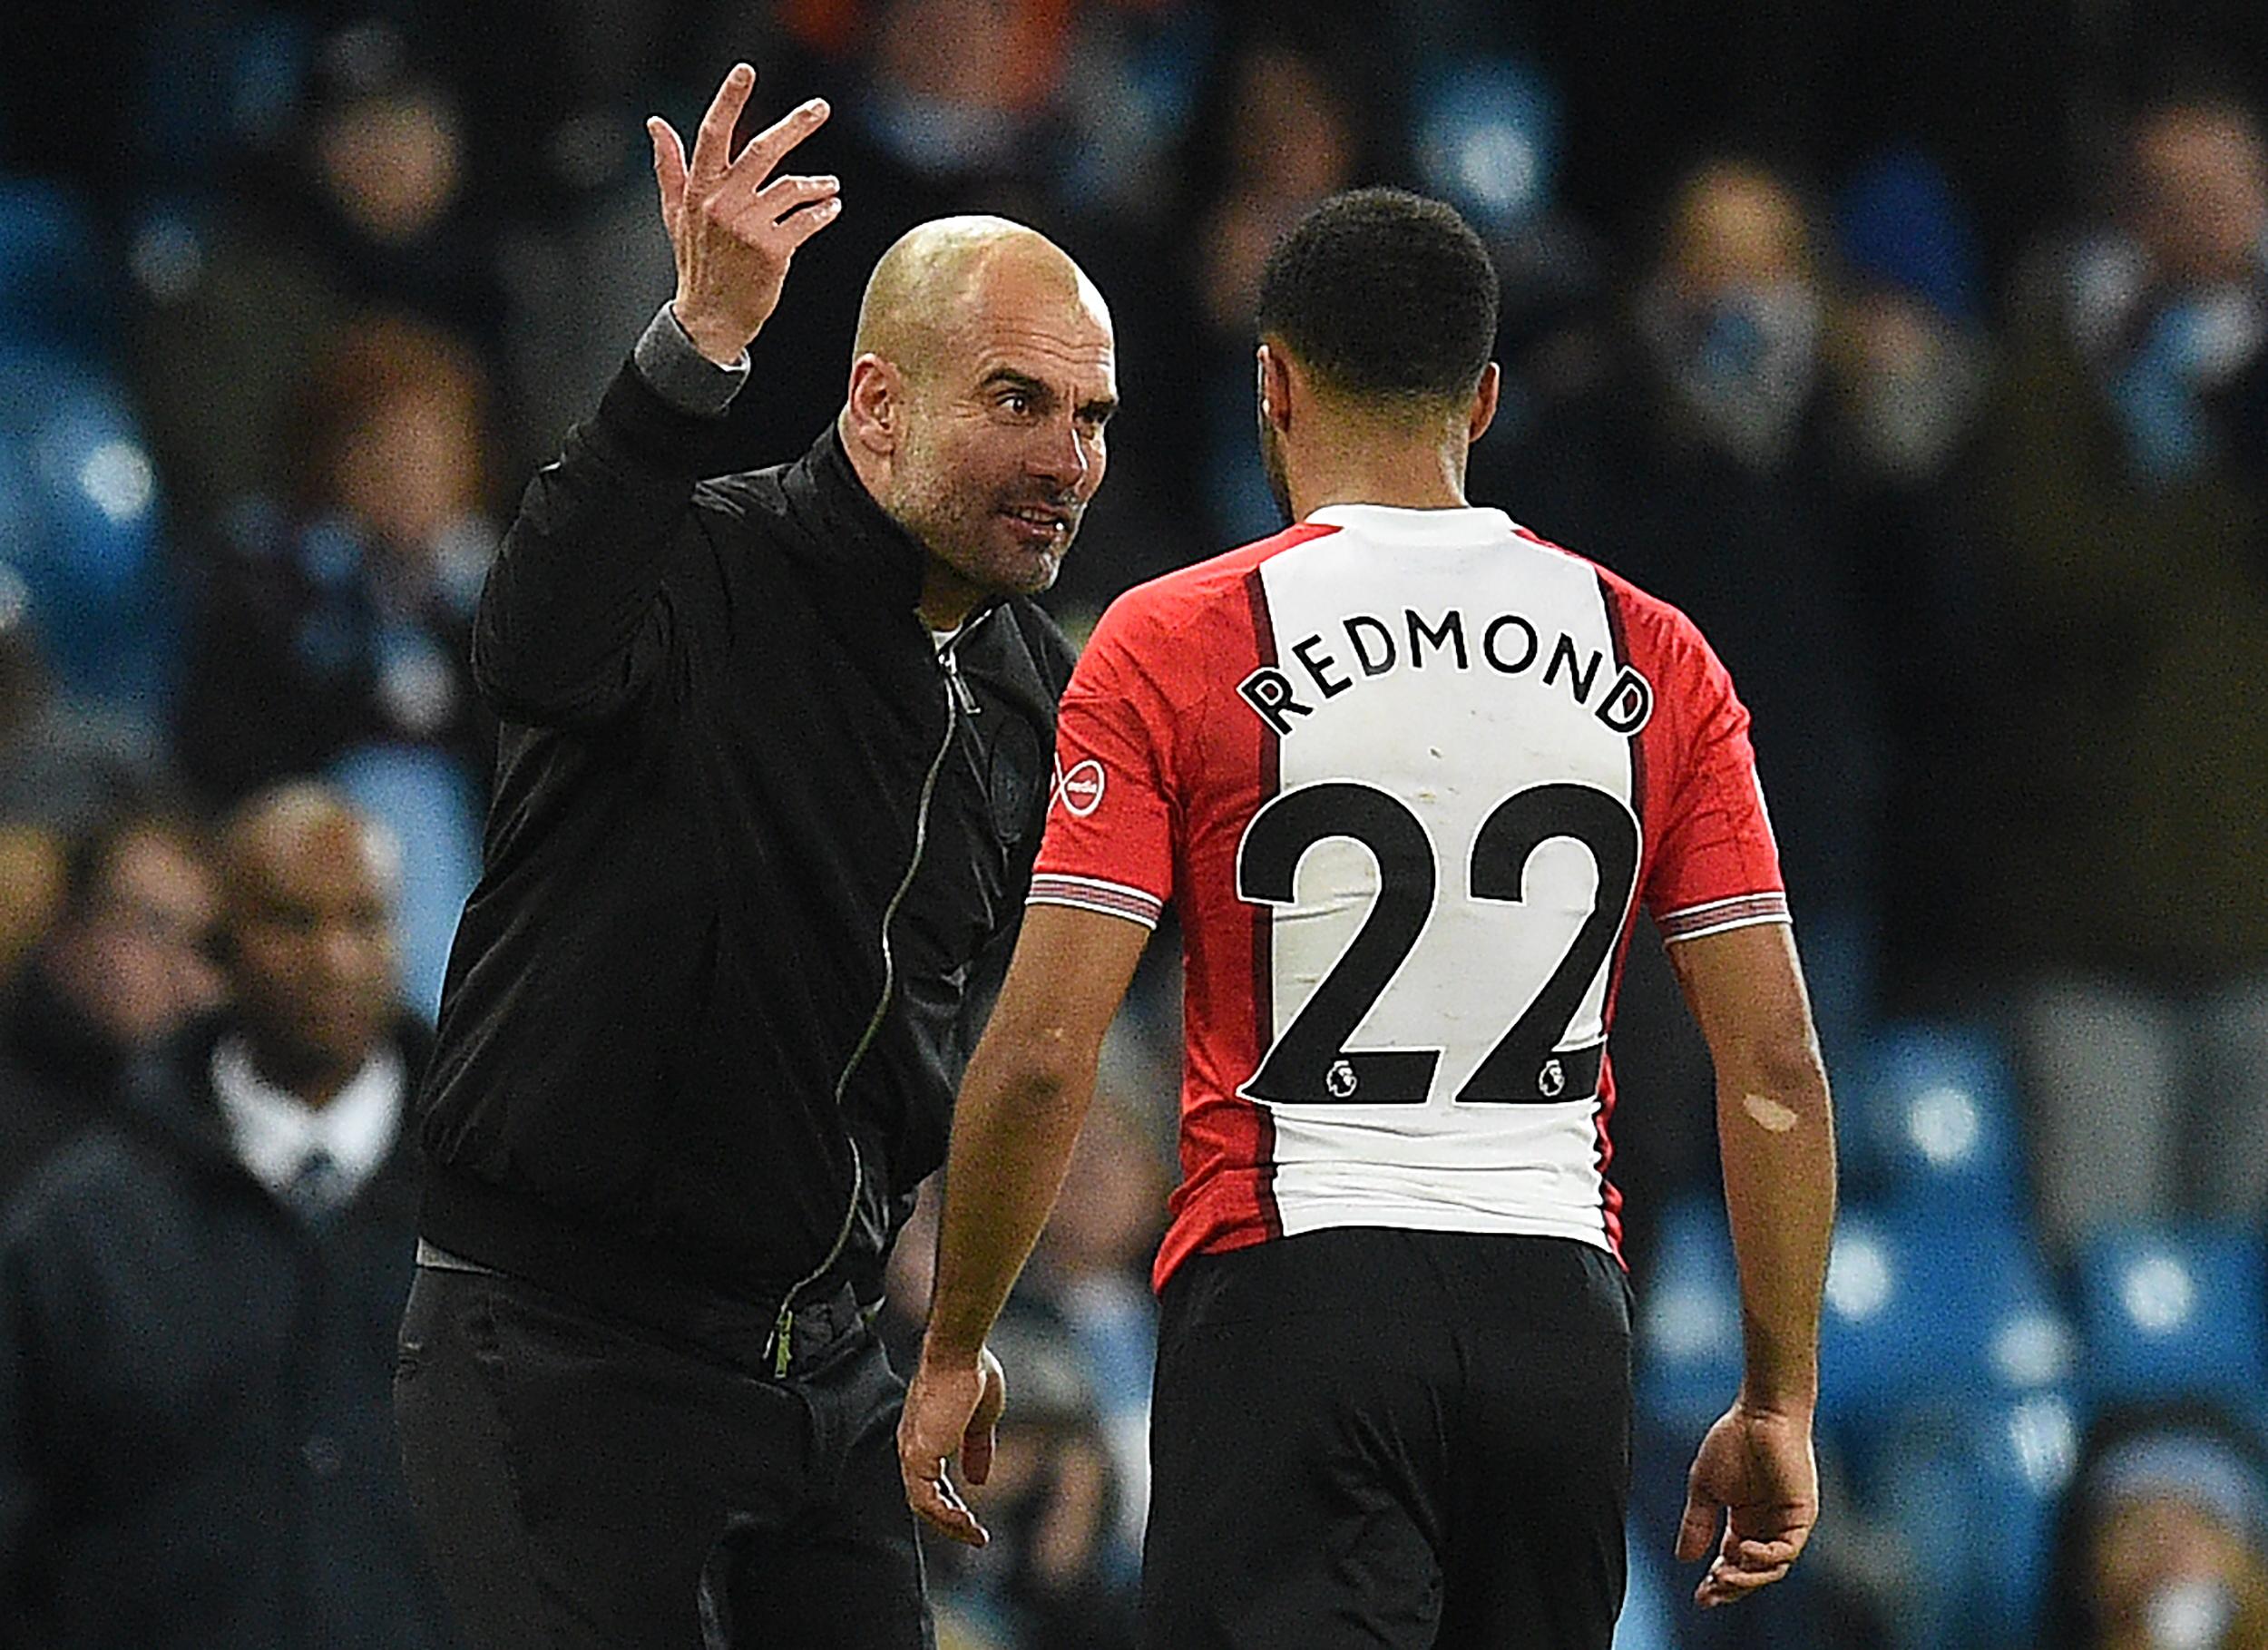 Manchester City&apos;s Pep Guardiola regrets fiery post-match exchange with Southampton&apos;s Nathan Redmond